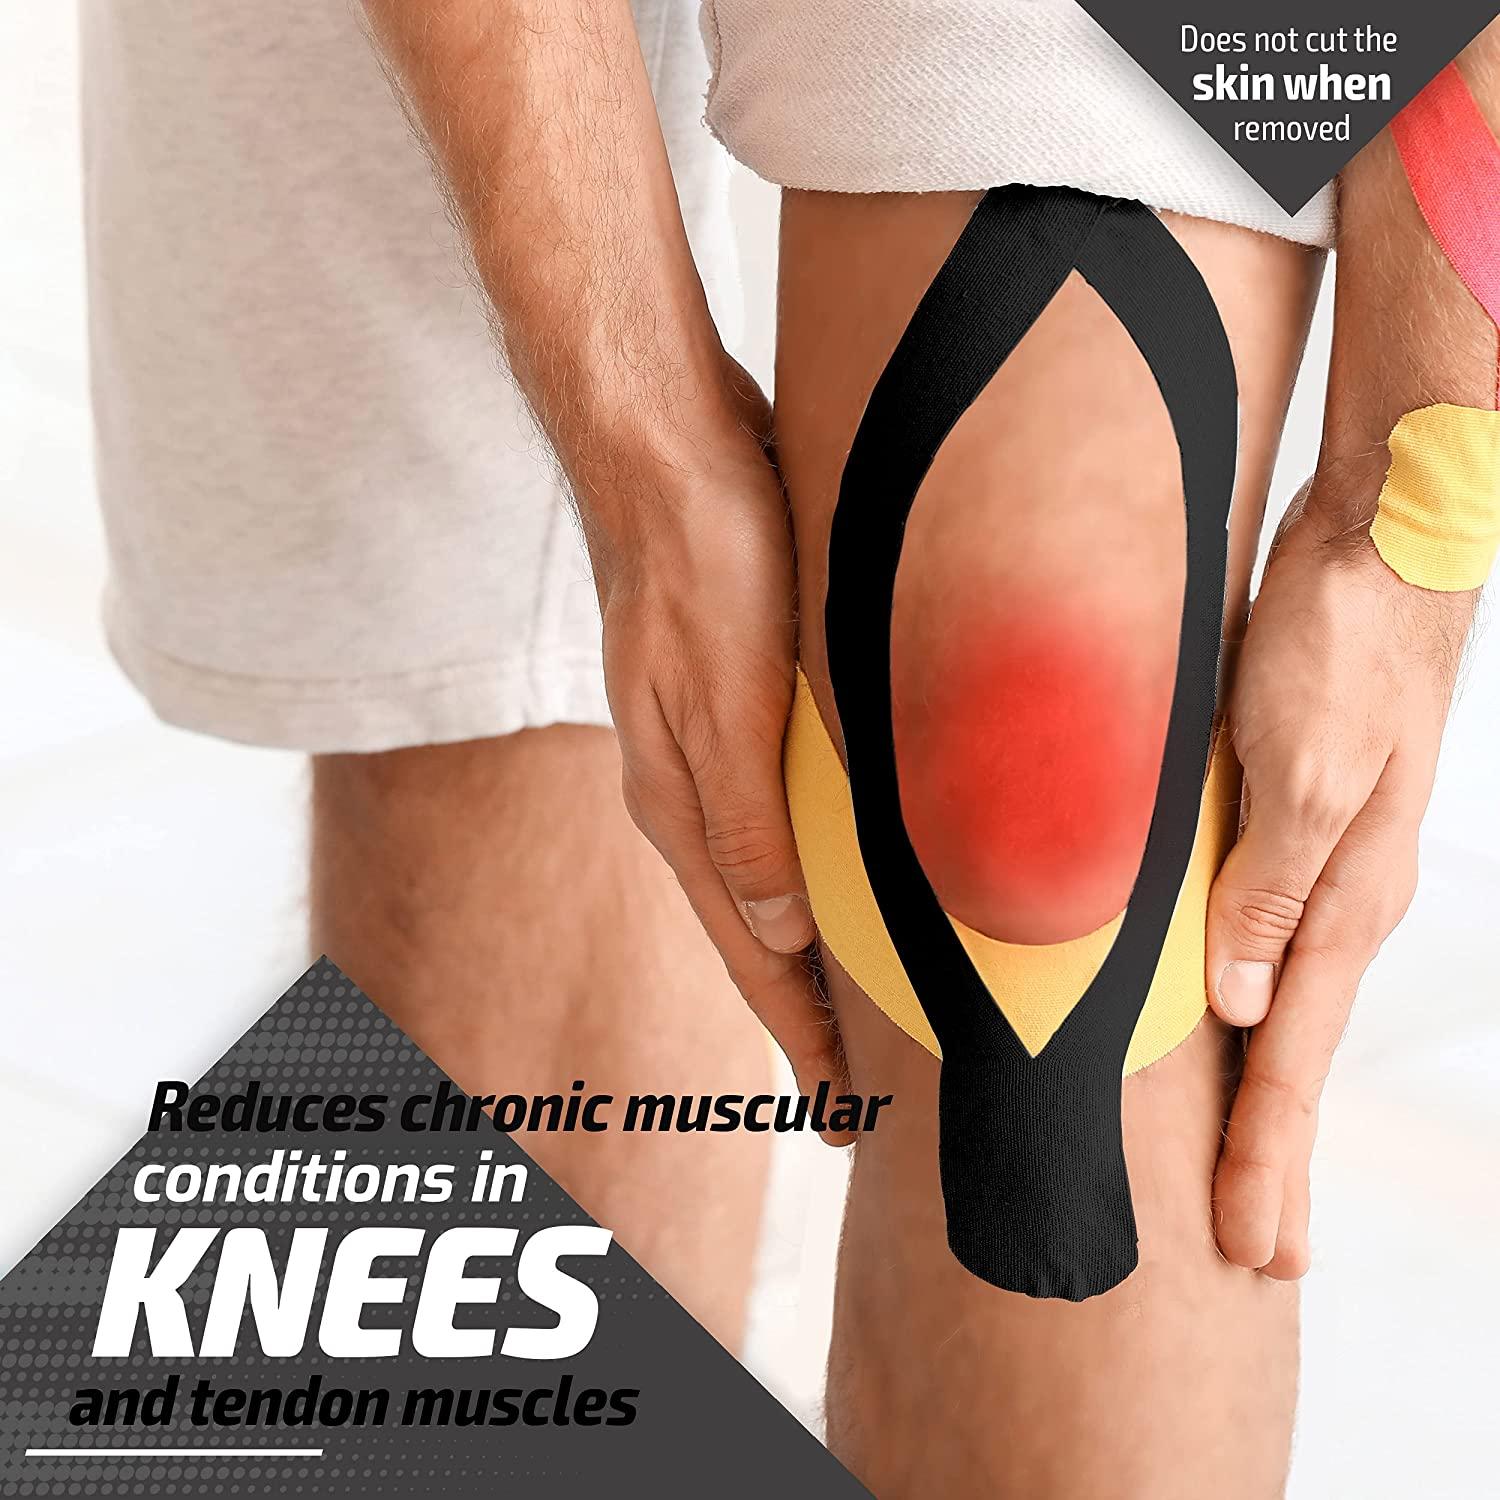 Kinesiology Tape for Arthritis: Does It Help Treat Pain and Stiffness?